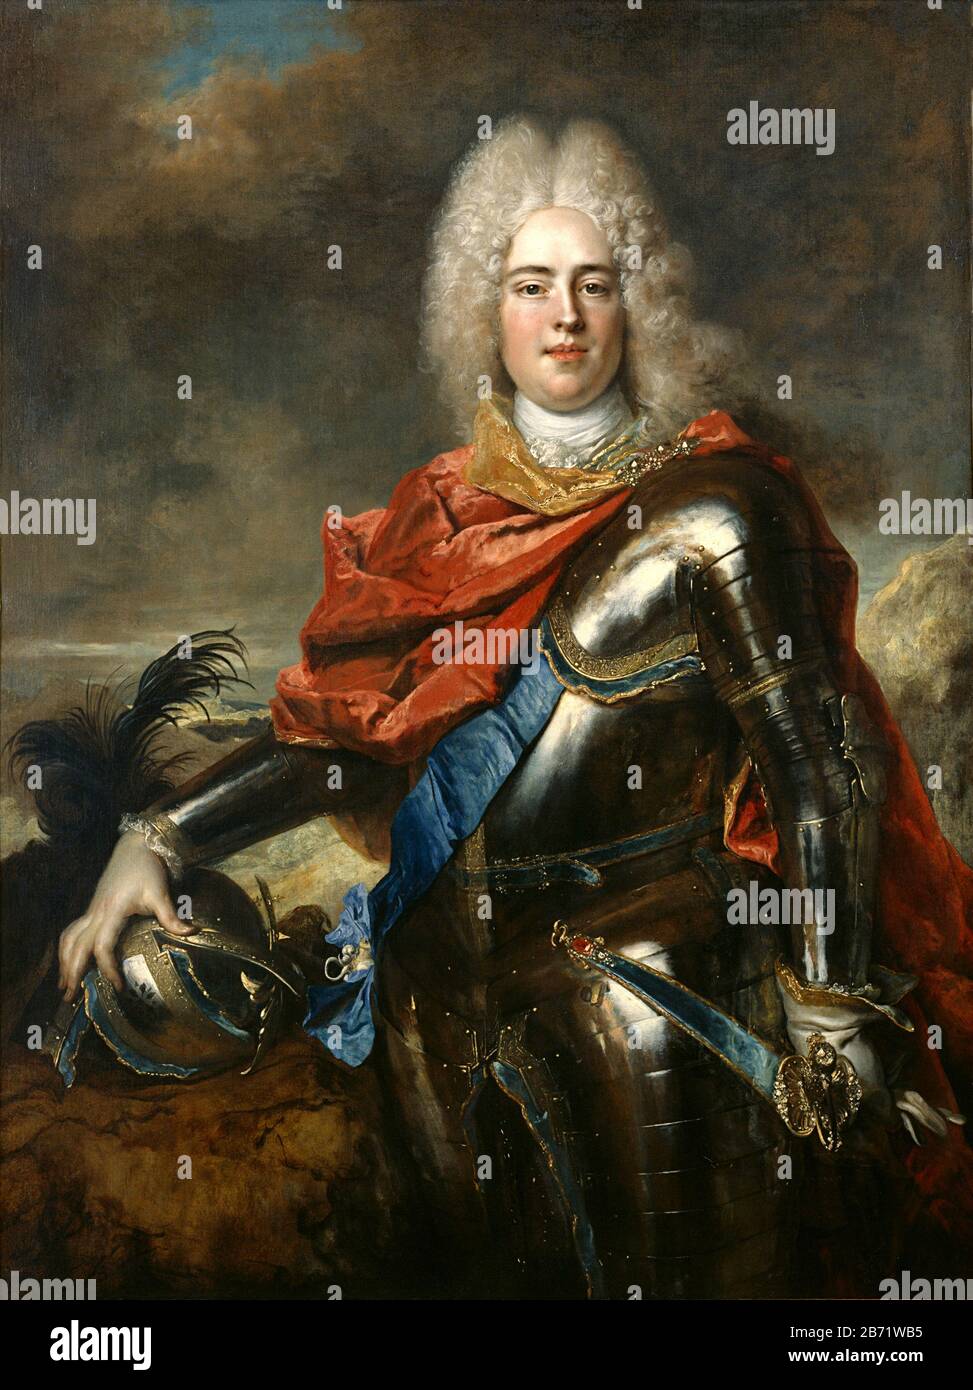 Portrait Of Augustus III of Poland, Nicolas de Largillière Augustus III (1696 – 1763) King of Poland and Grand Duke of Lithuania from 1734 until 1763, as well as Elector of Saxony in the Holy Roman Empire from 1733 until 1763 where he was known as Frederick Augustus II Stock Photo